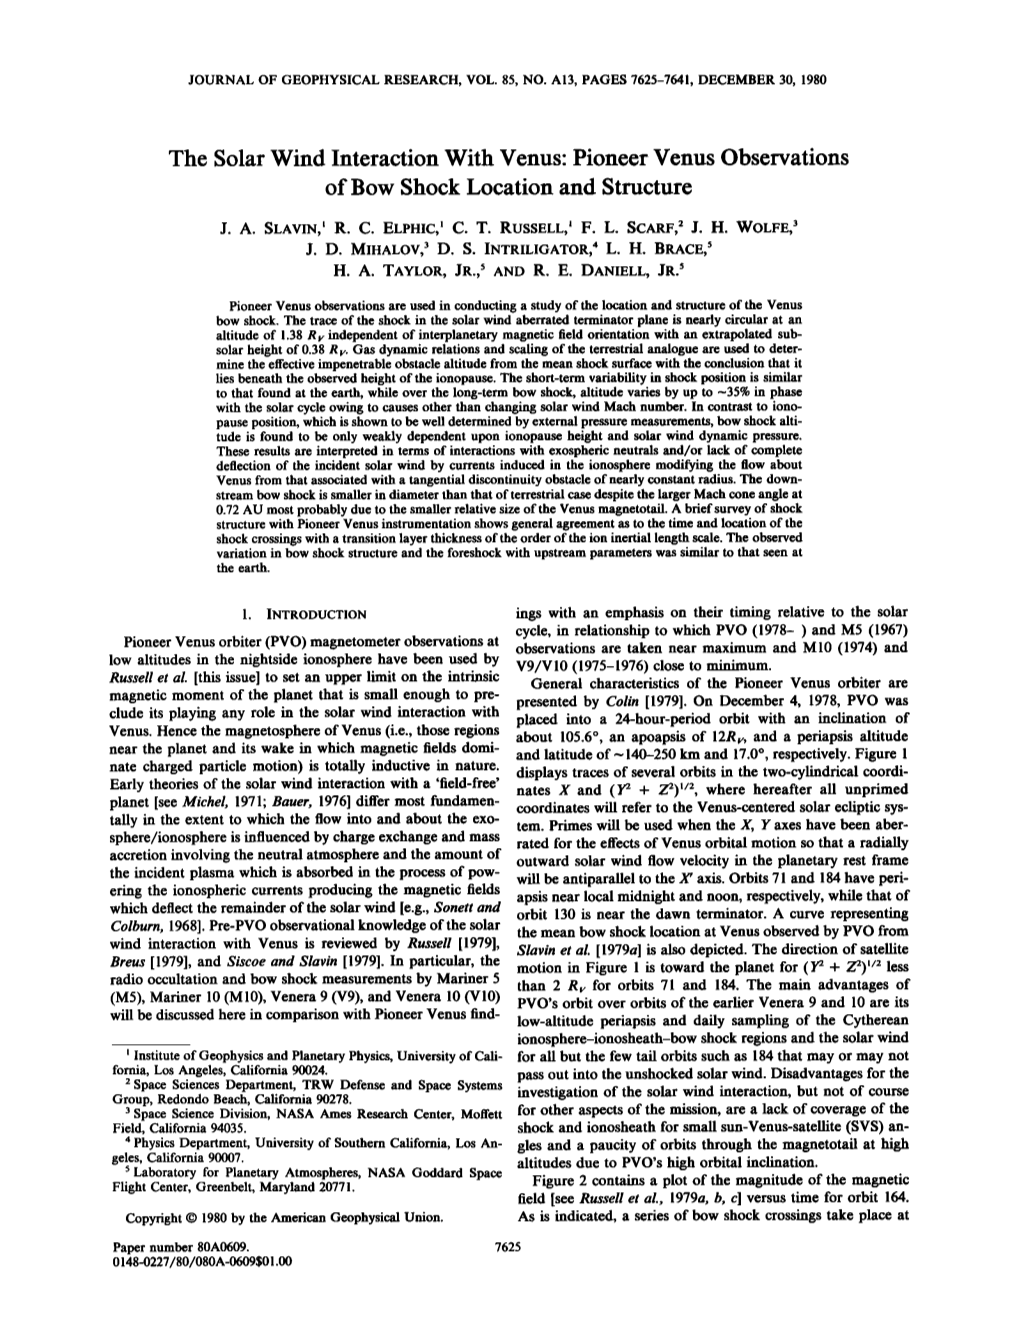 Pioneer Venus Observations of Bow Shock Location and Structure